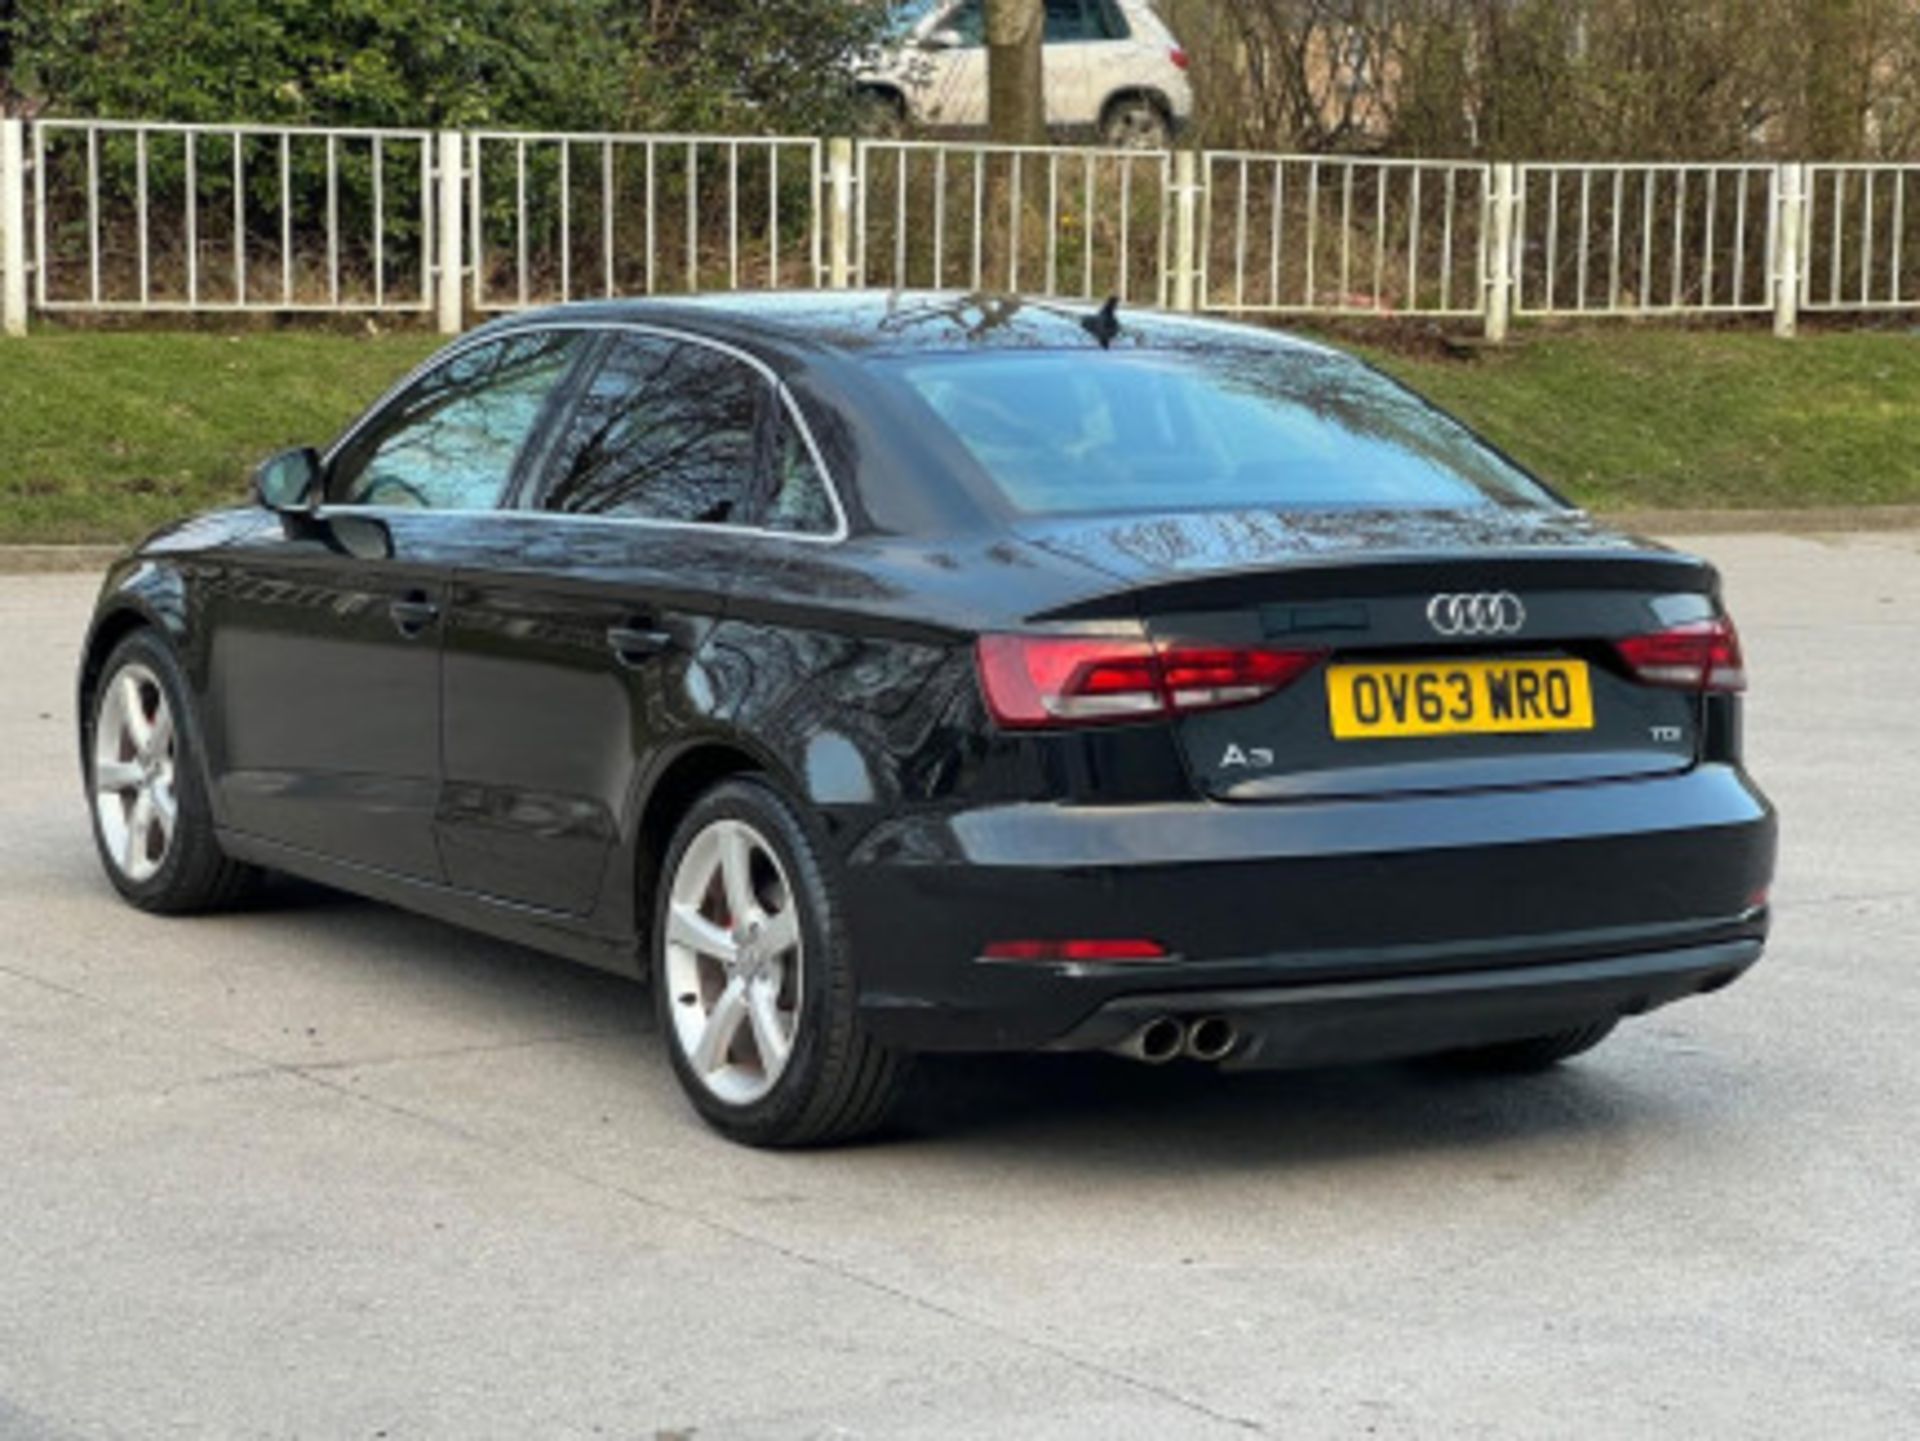 AUDI A3 2.0TDI SPORTBACK - STYLE, PERFORMANCE, AND COMFORT COMBINED >>--NO VAT ON HAMMER--<< - Image 88 of 216